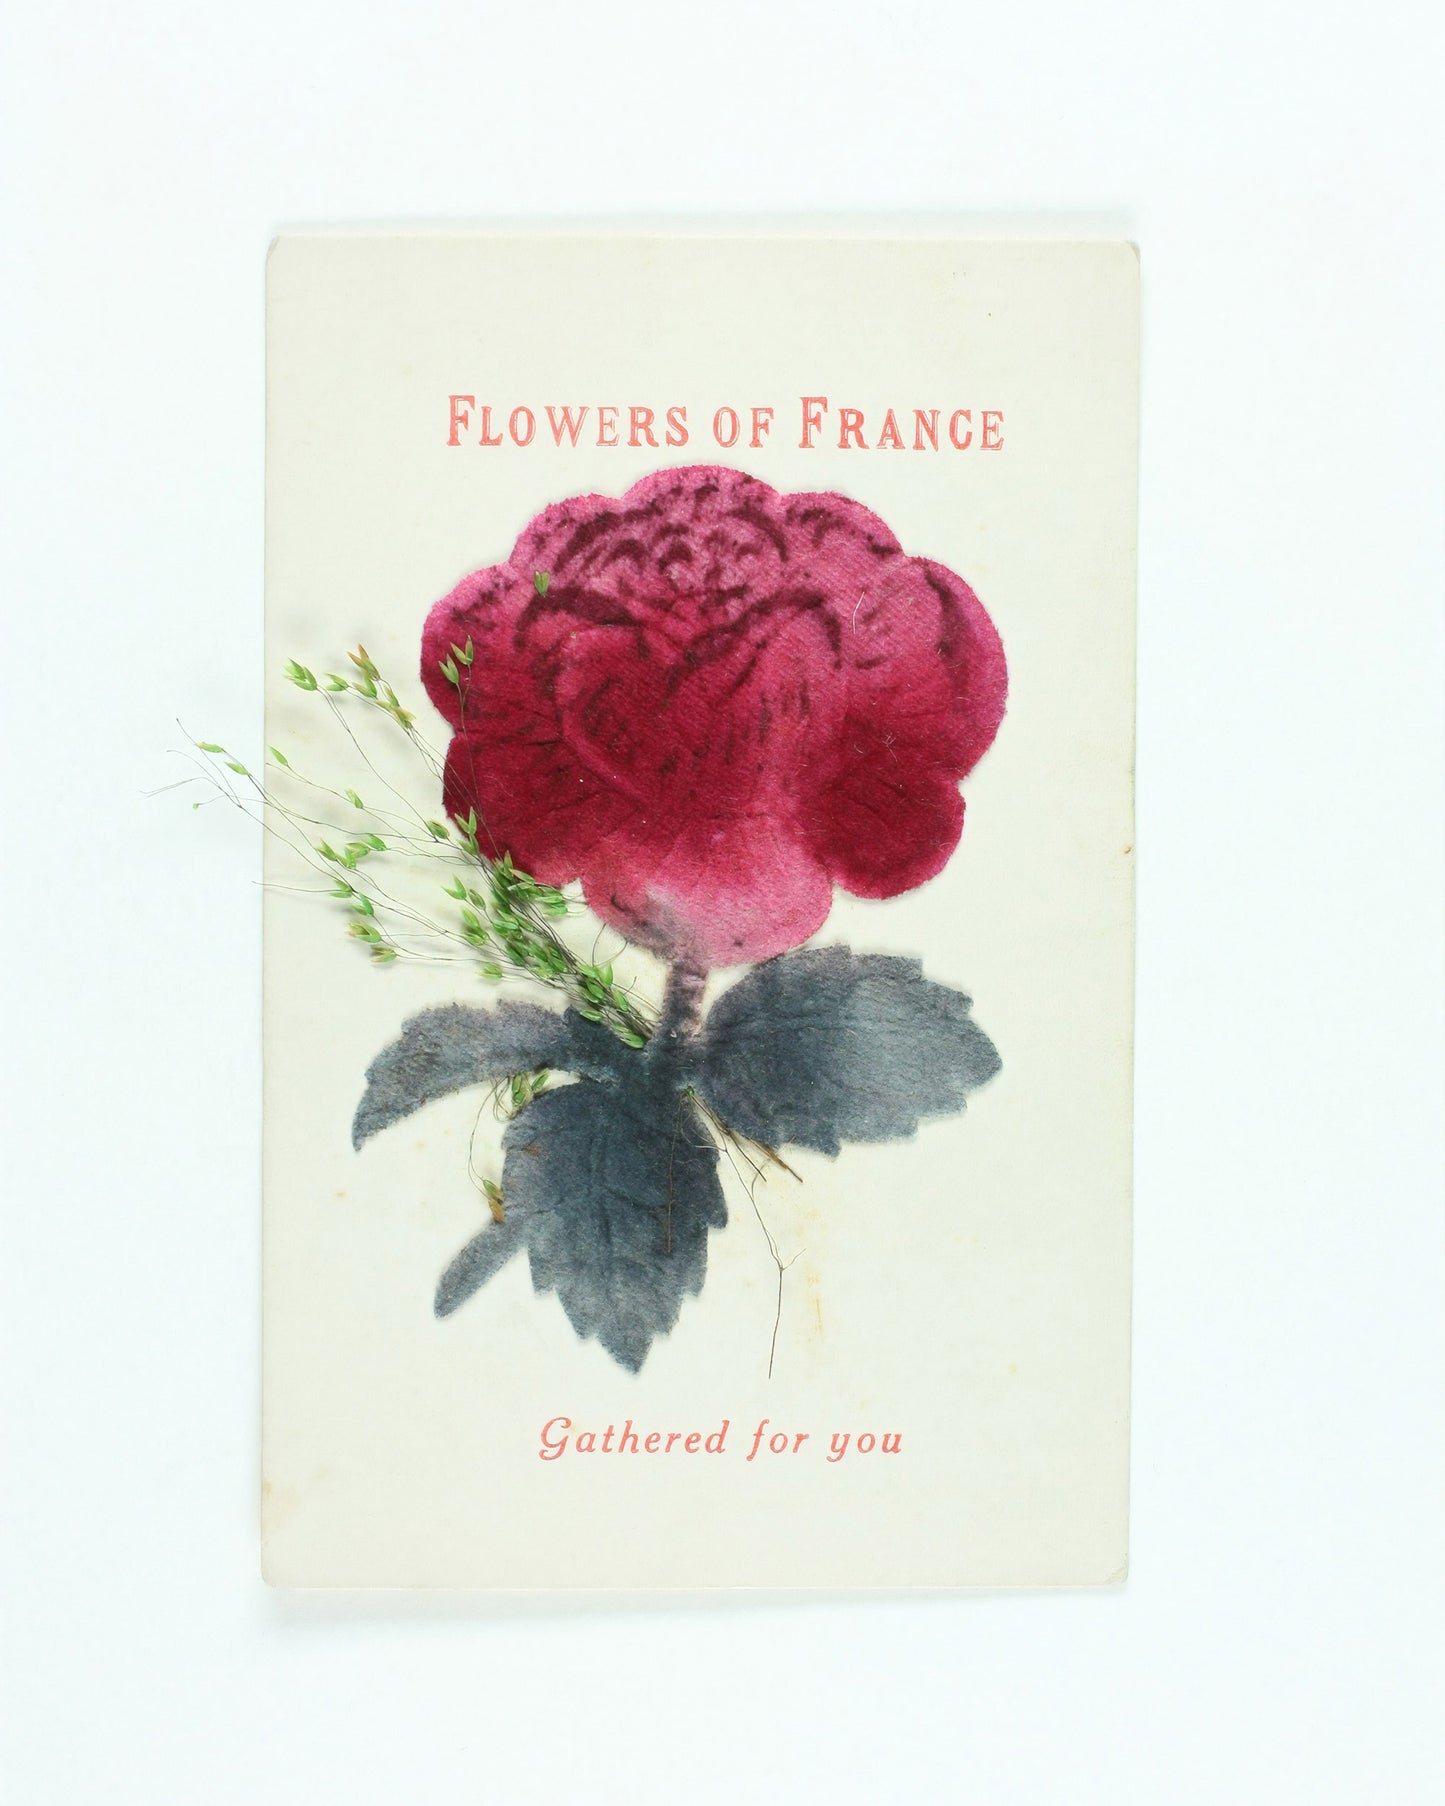 Flowers of France